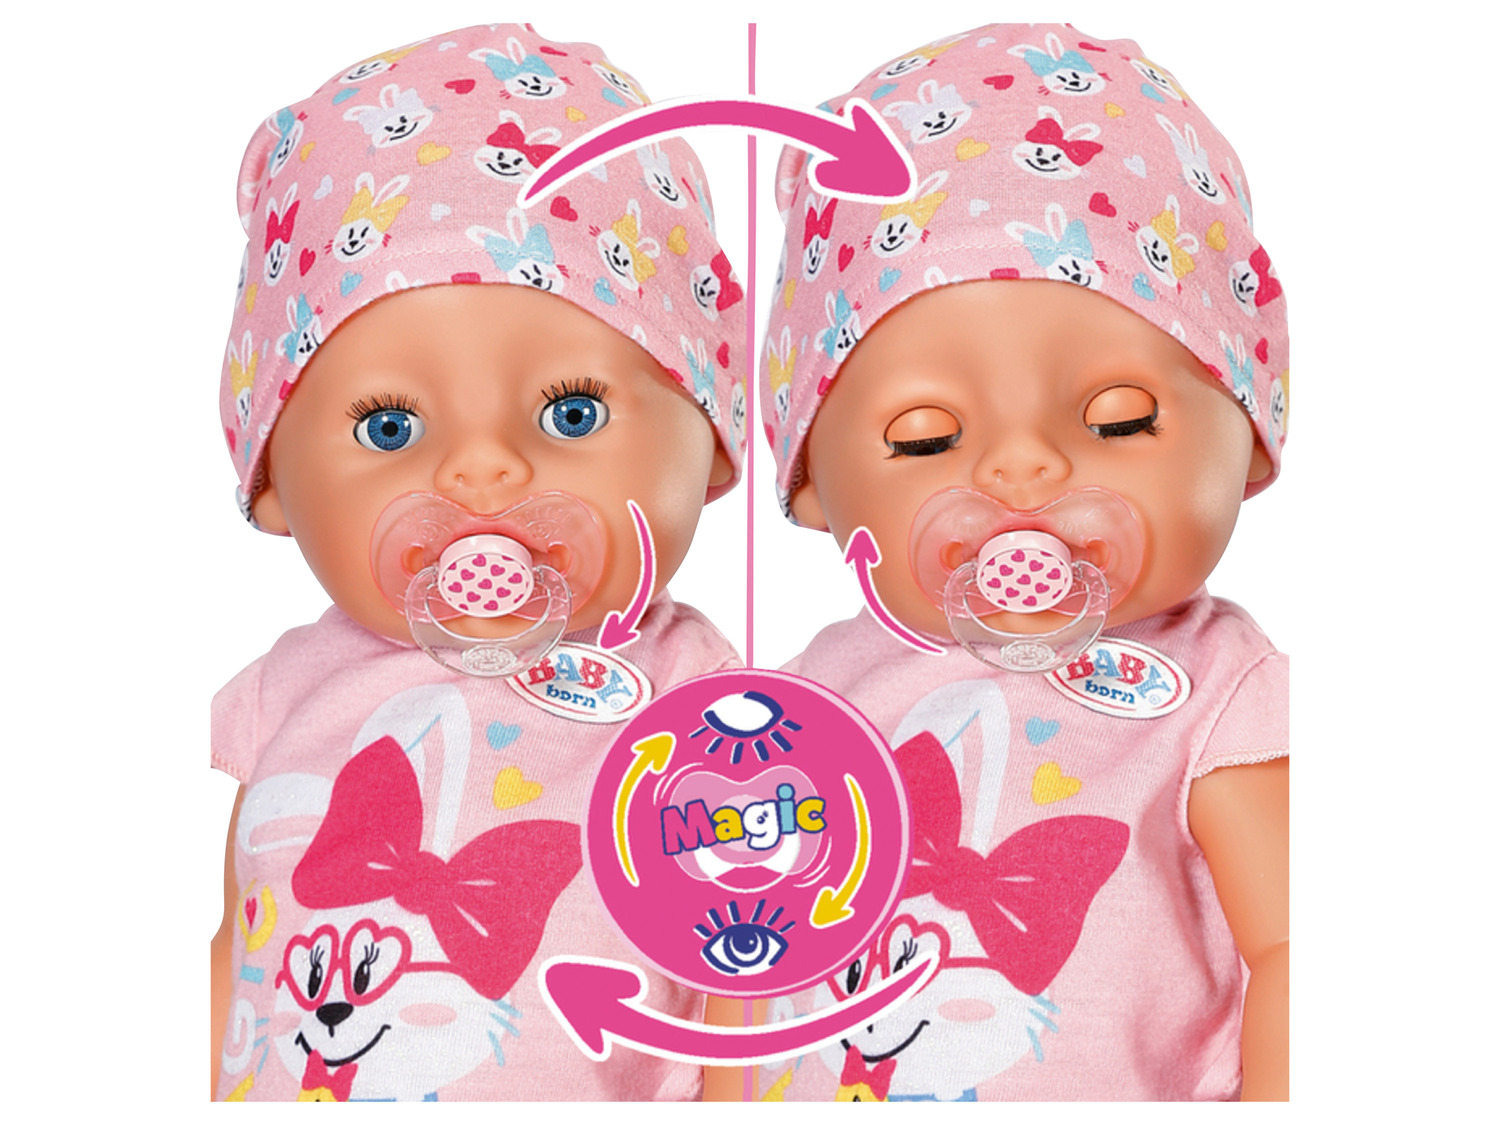 Baby Born Puppe »Magic Girl«, mit 10 Funktionen | LIDL